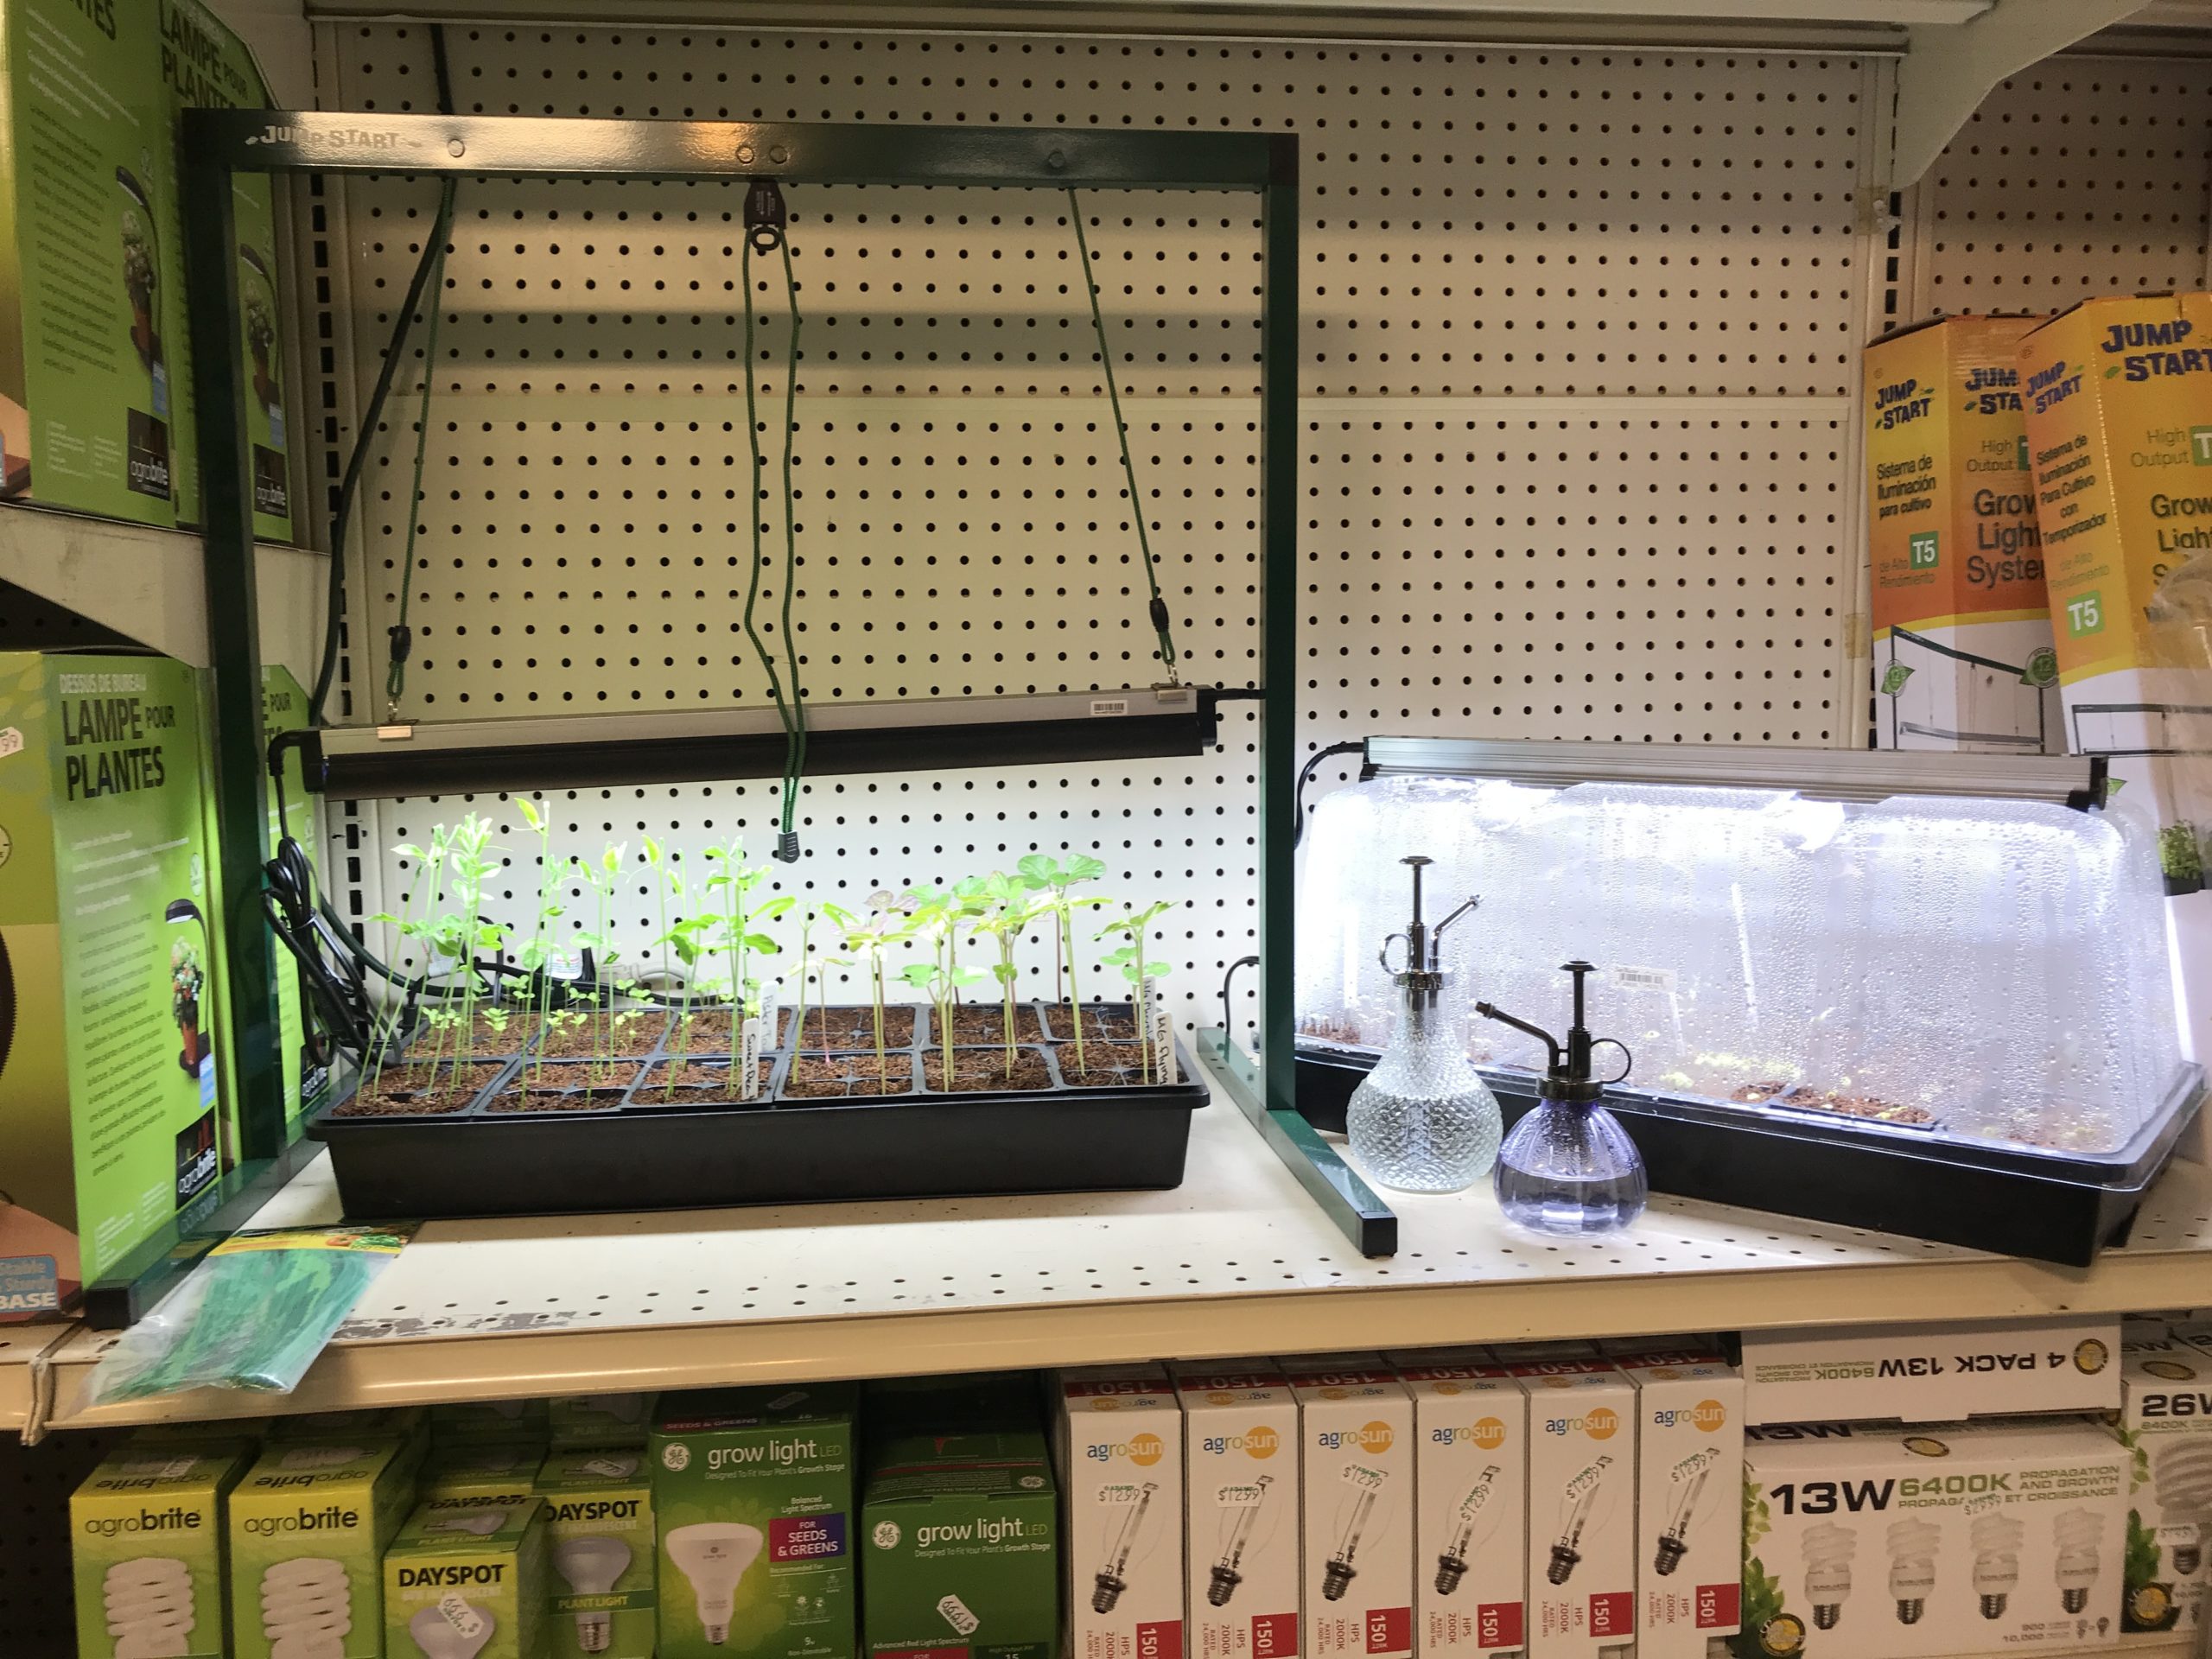 Garden centers, home centers and online garden stores sell a wide variety of artificial lighting options for seed starting. Make sure there is enough wattage for the space and know how far the lights need to be from the seedlings. Both LED and fluorescent systems are available.